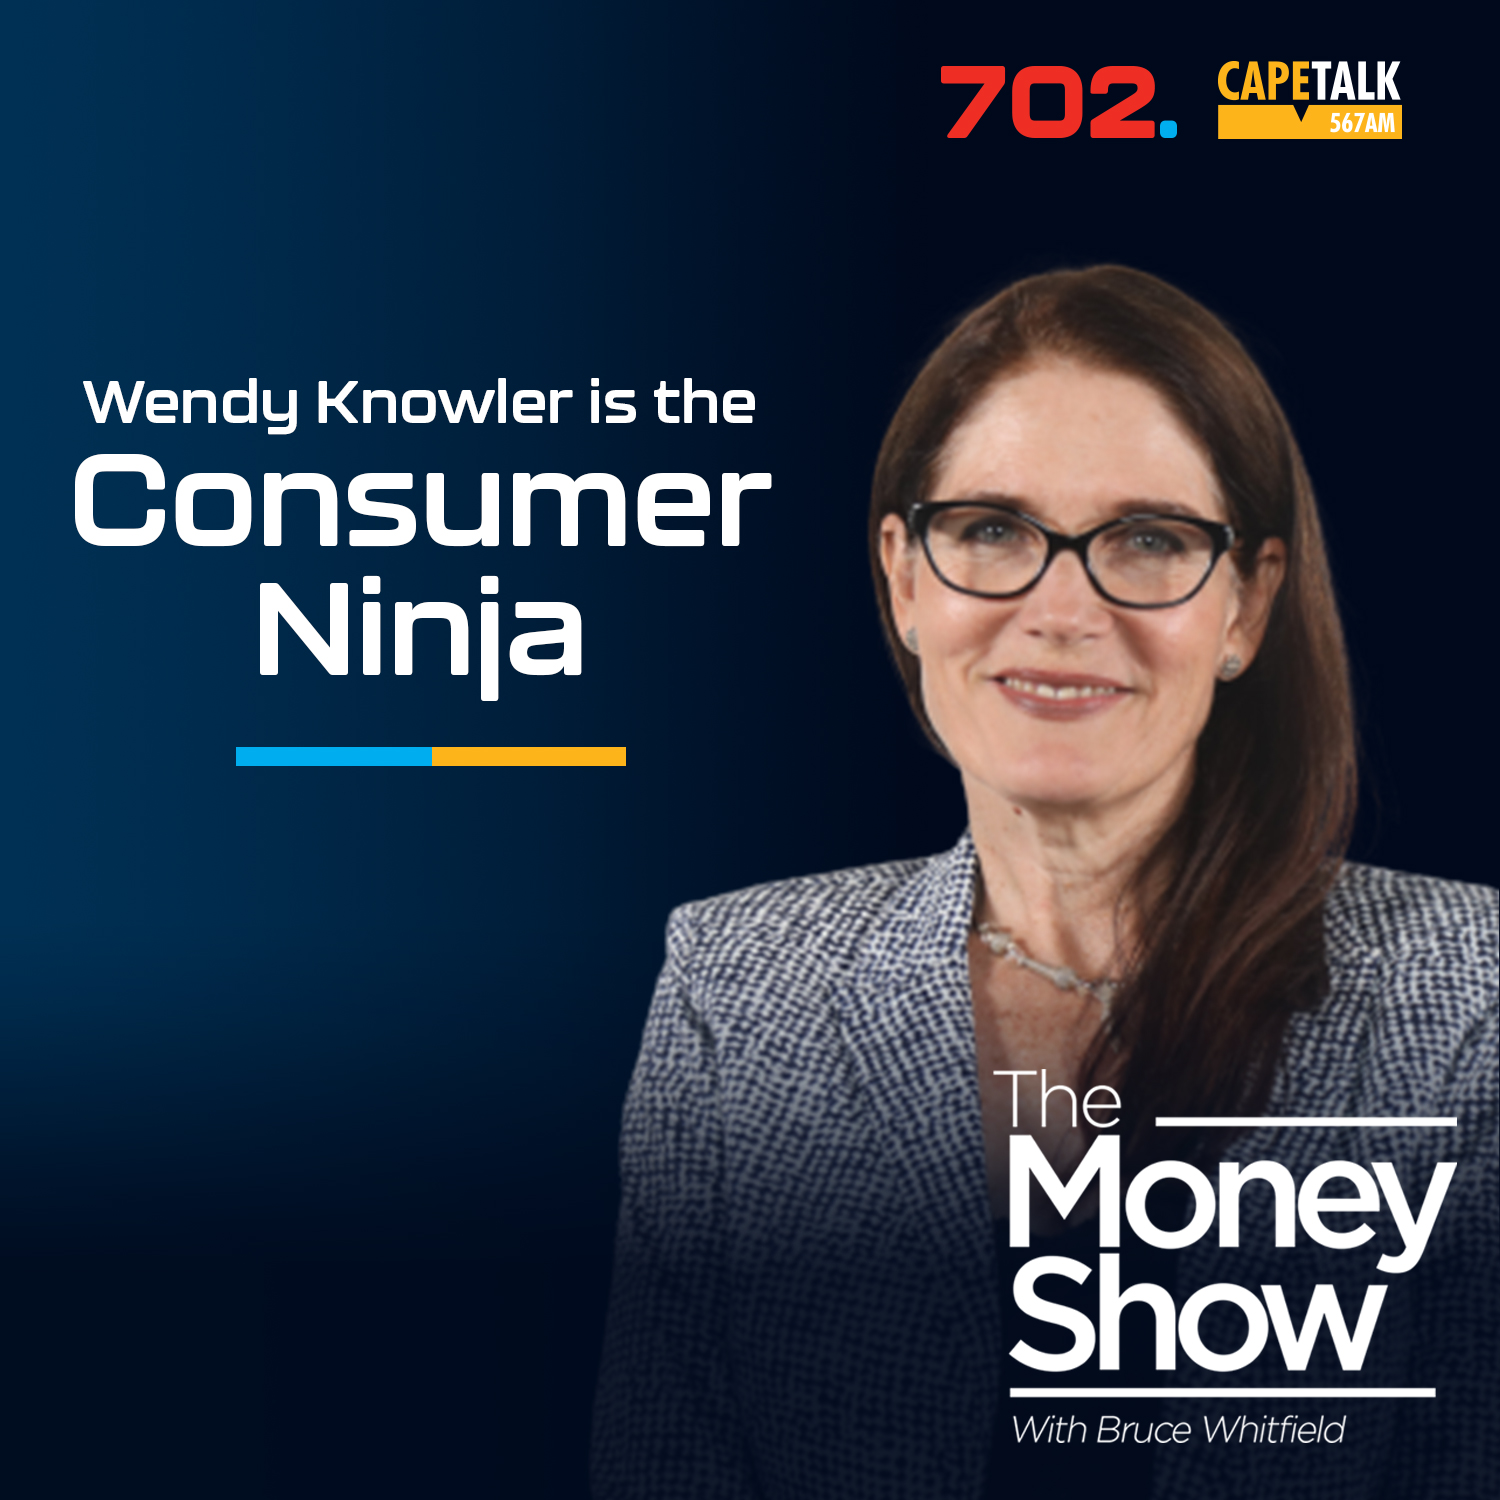 Consumer ninja -  BEC - Business email compromise